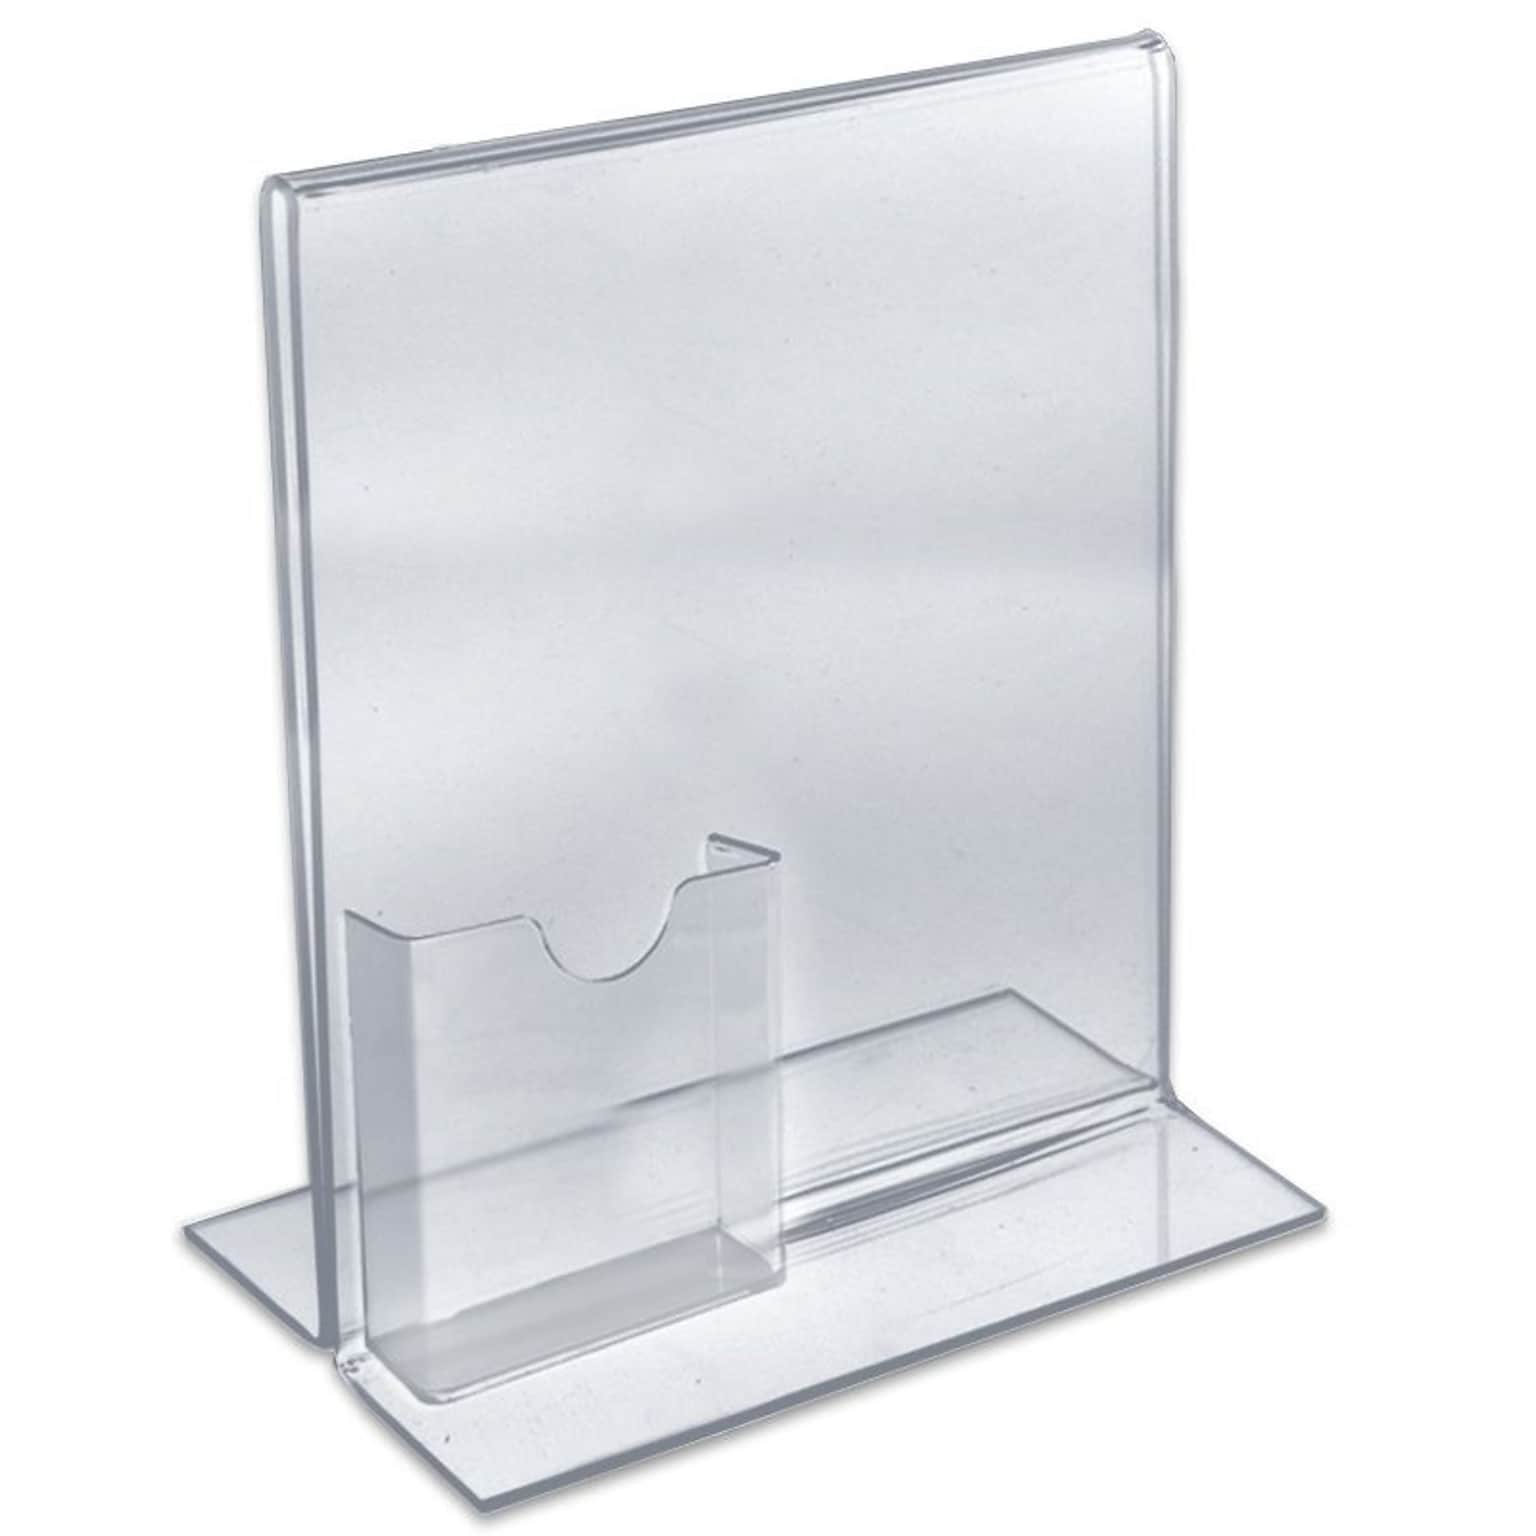 Azar® 11 x 8 1/2 Vertical Double Sided Stand Up Acrylic Sign Holder with Brochure Pocket, Clear, 10/Pack